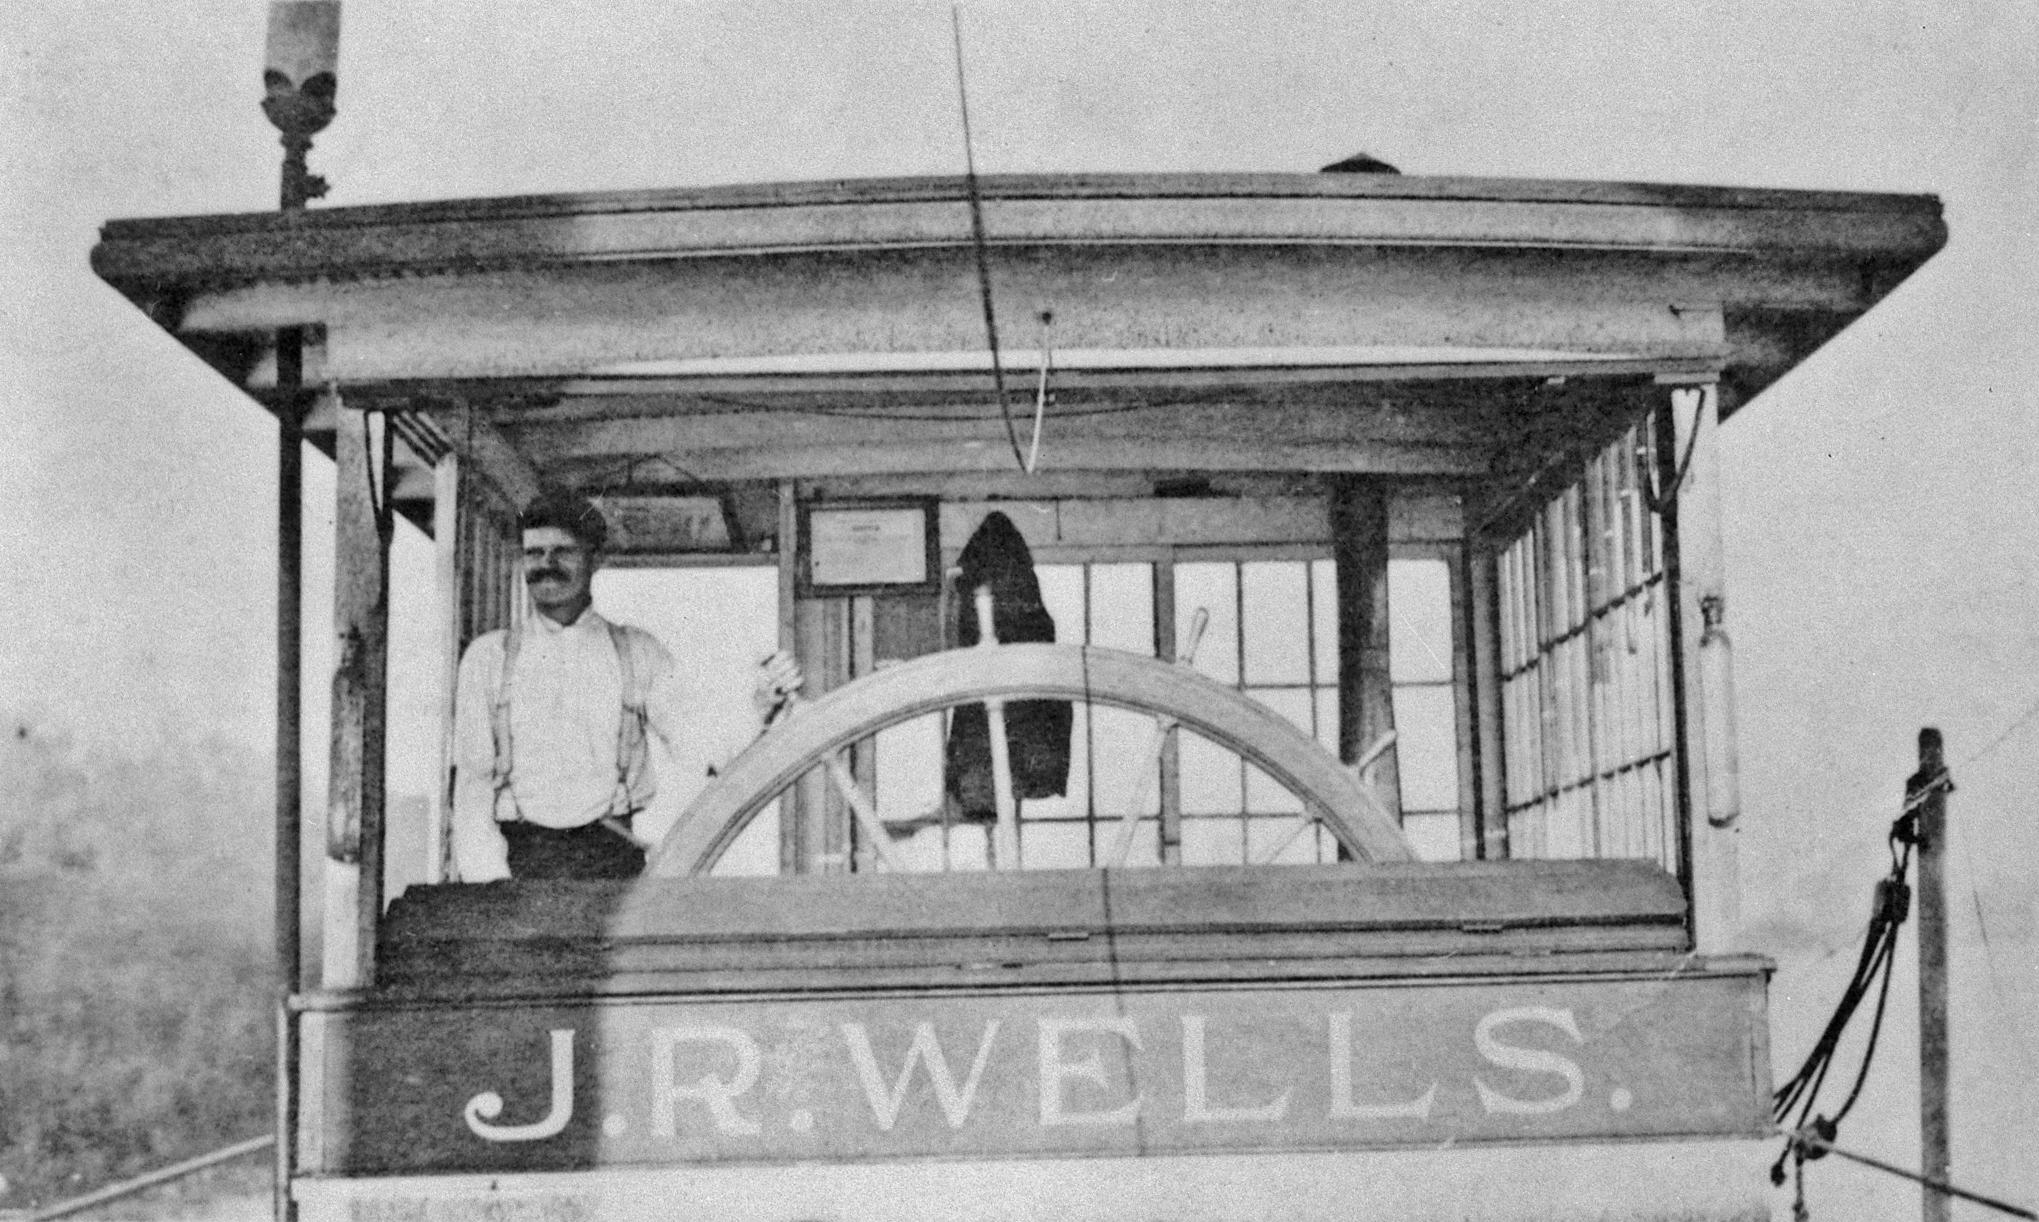 J. R. Wells (Packet/Towboat, 1897-1920)